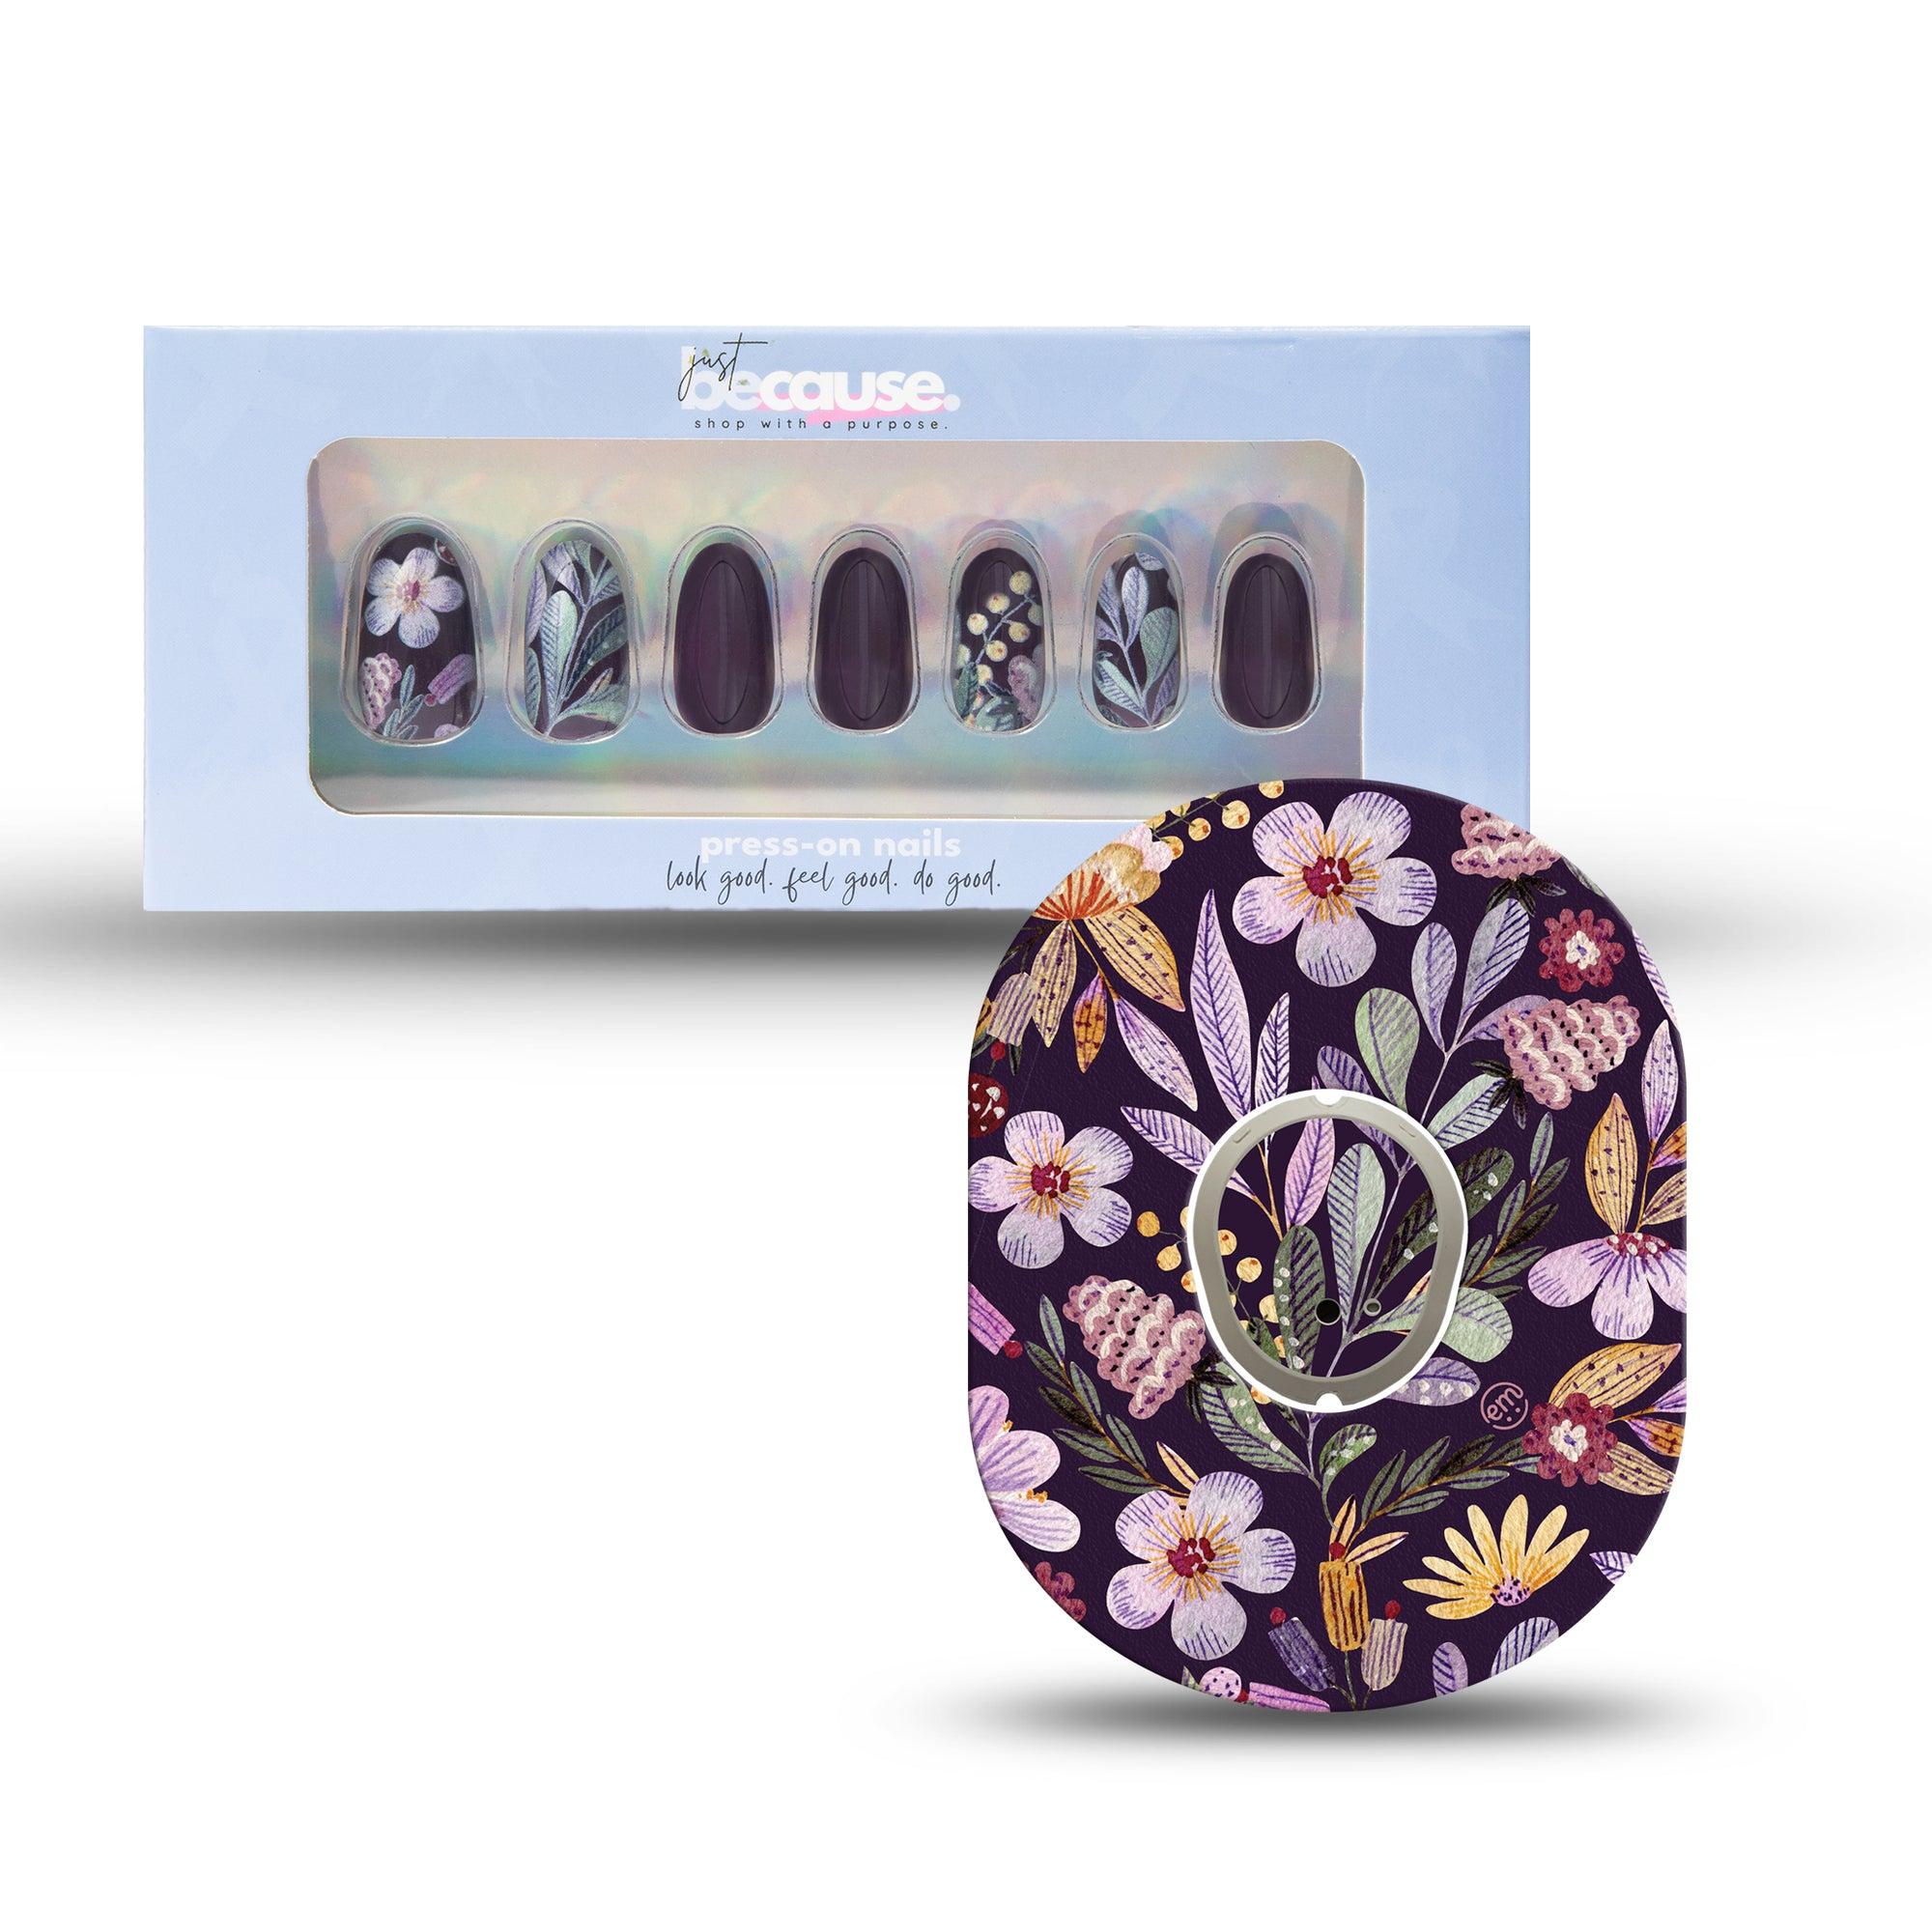 ExpressionMed Just BeCause 24 Pcs ABS Press on nails Medium, park purple and yellow flowers Fake Nails set with matching Moody Blooms Dexcom G7 Fixing Ring and Center Sticker, Support T1D - ExpressionMed.com	